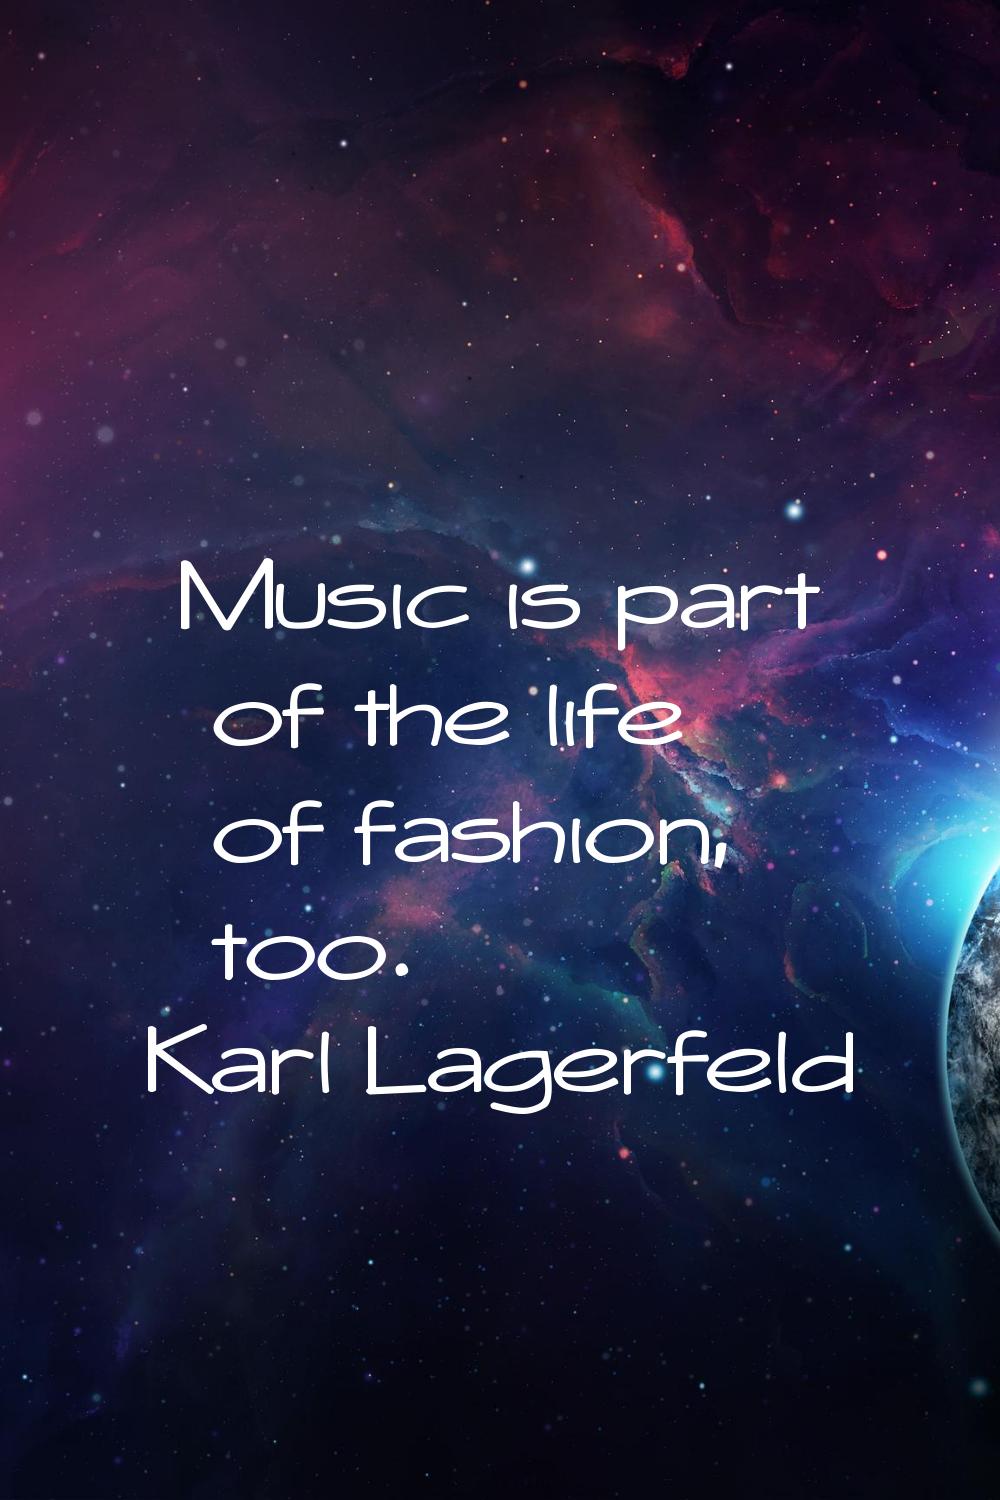 Music is part of the life of fashion, too.